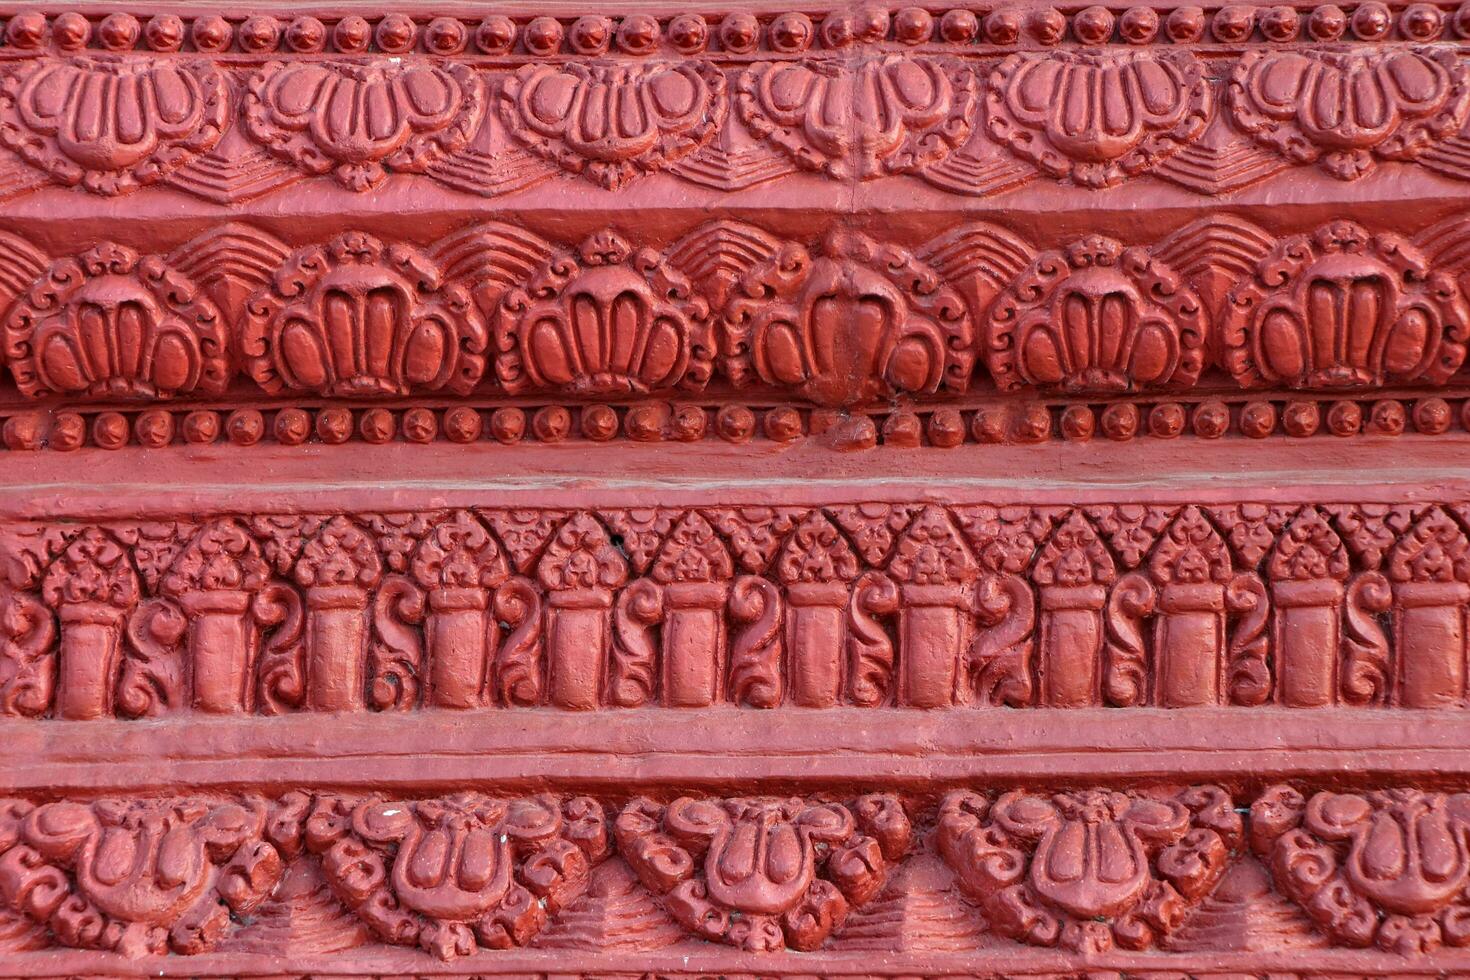 The concrete walls are painted in red and have simple carved patterns. photo